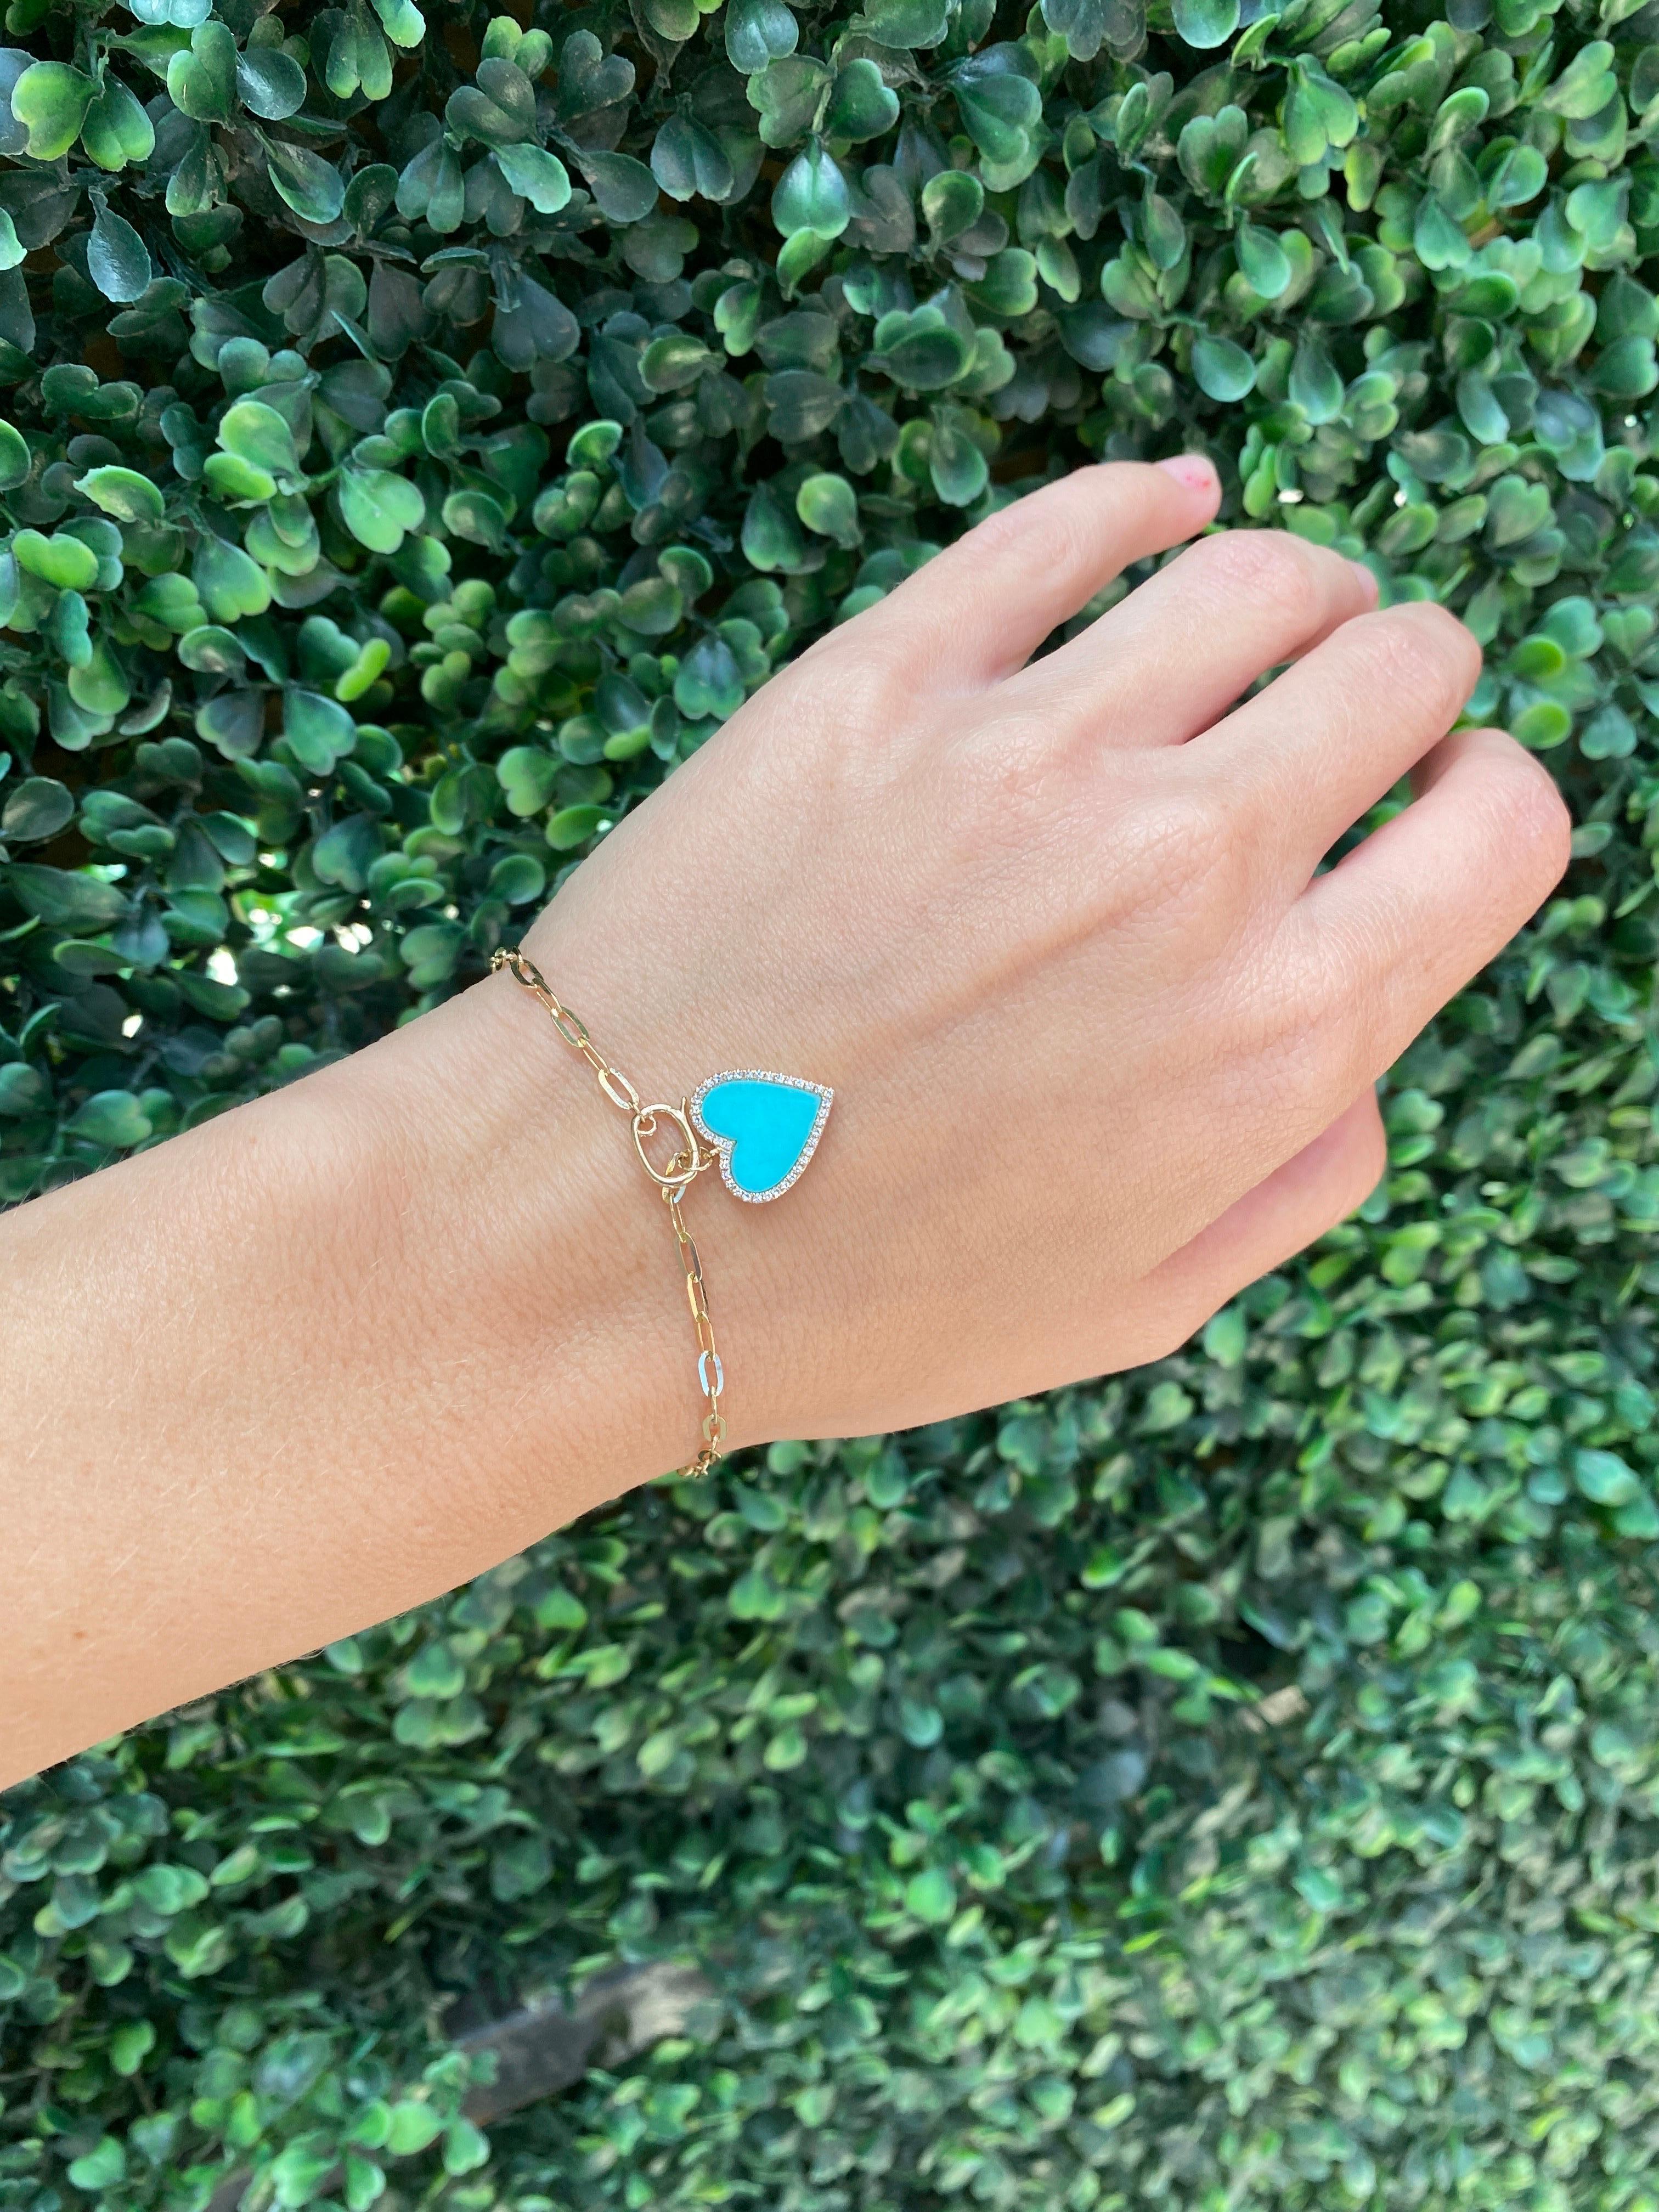 This 14 karat yellow gold bracelet features a turquoise heart with approximately 0.10 carat total weight in round diamonds that dangles from a link chain. 
Measurements: Length approximately 6.75